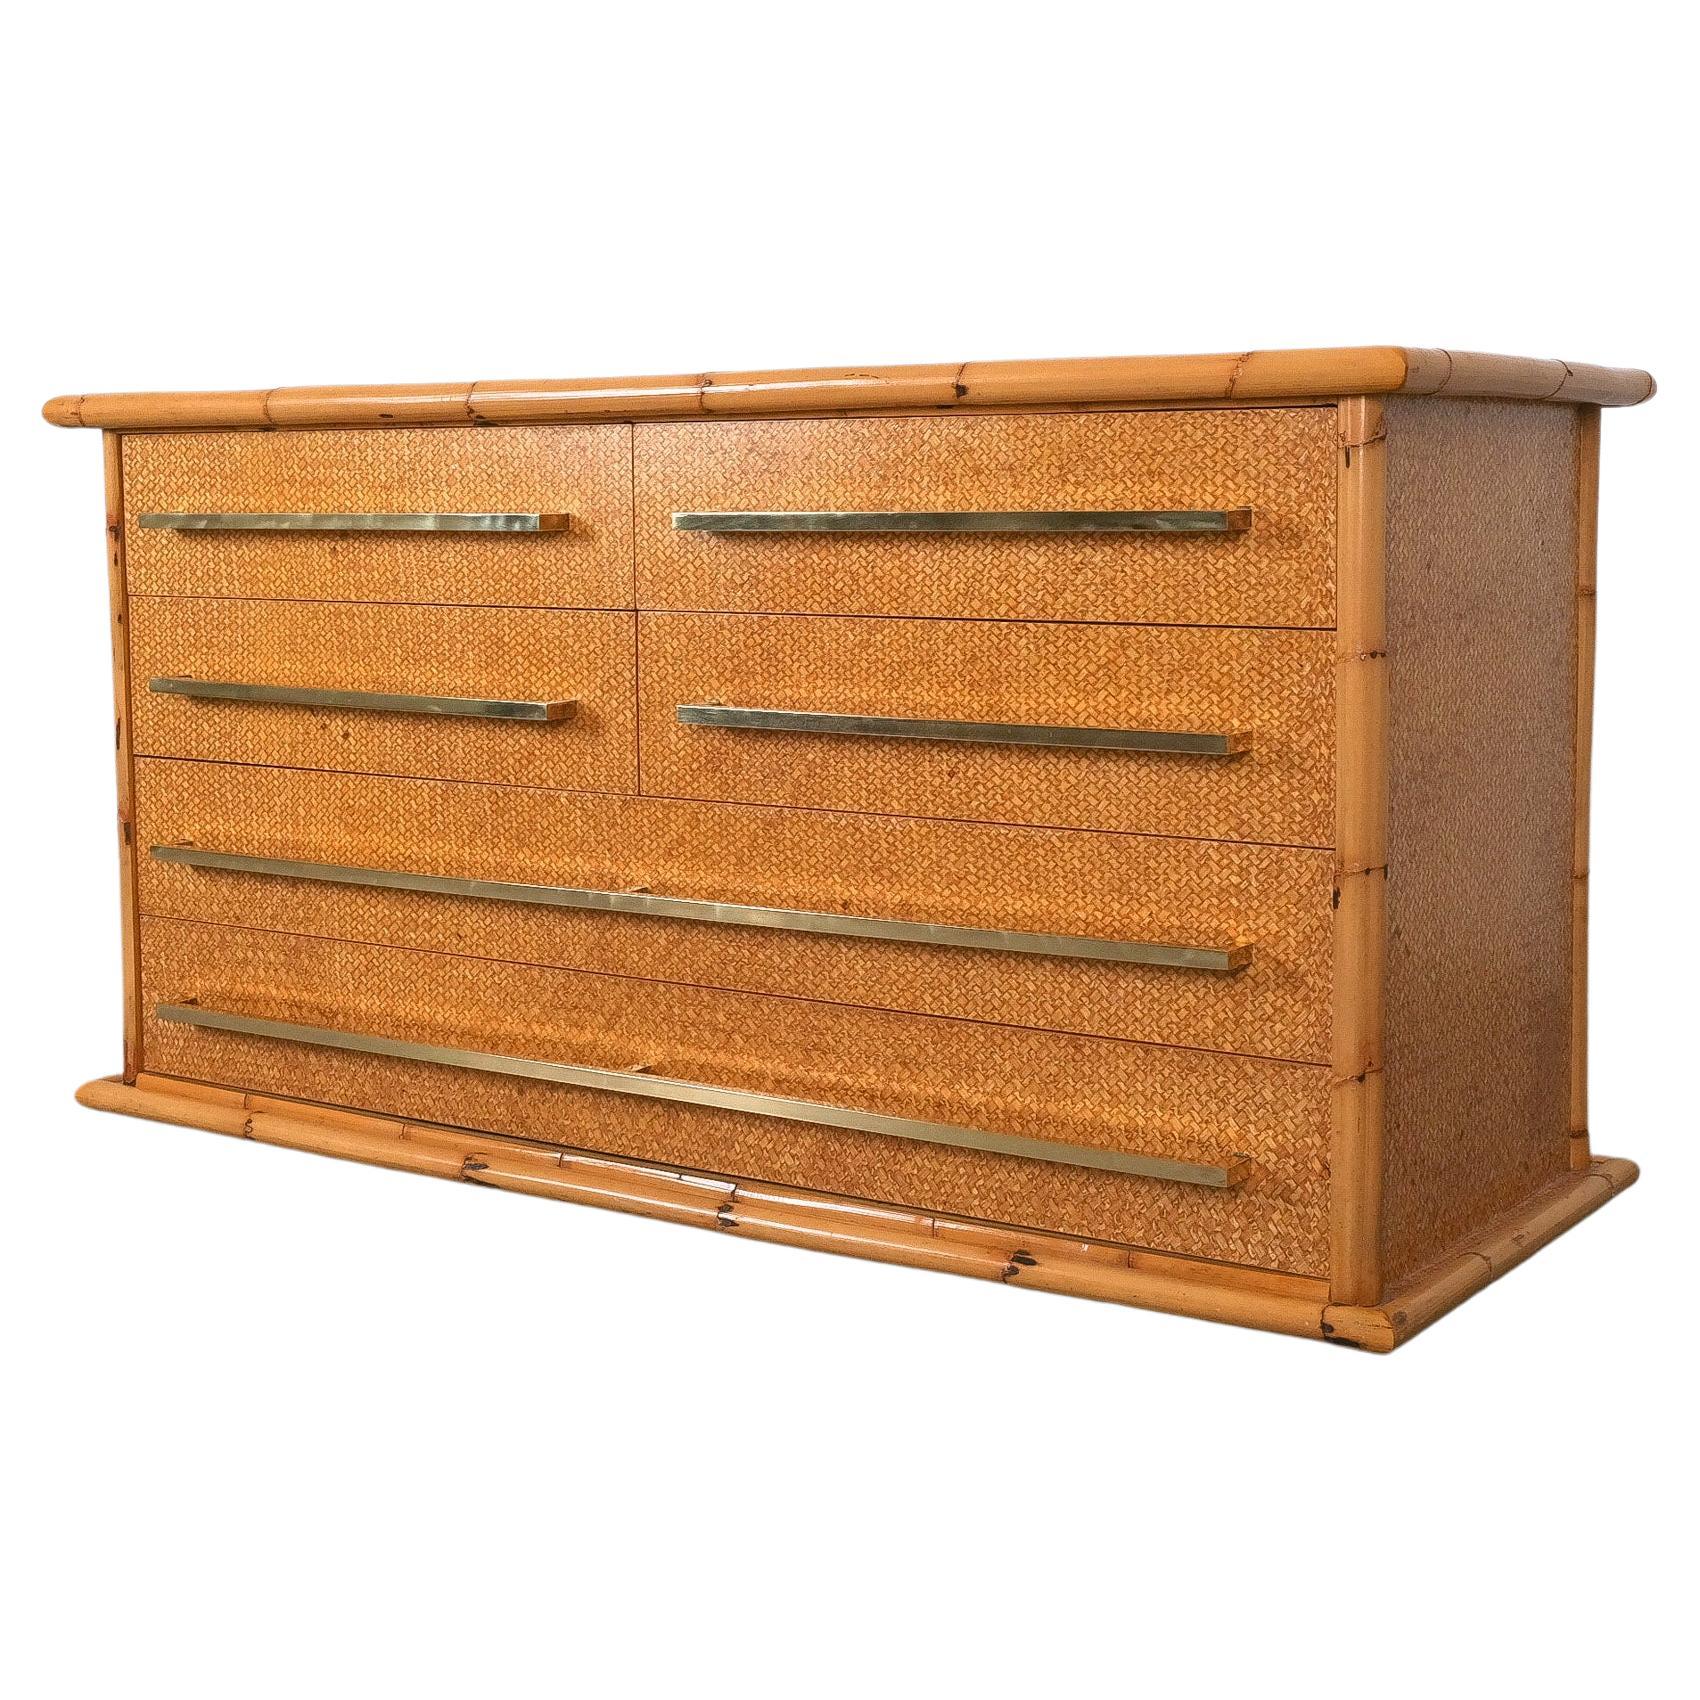 Bamboo Cane and Brass Commode Chest of Drawers by Vivai del Sud, Italy, 1975